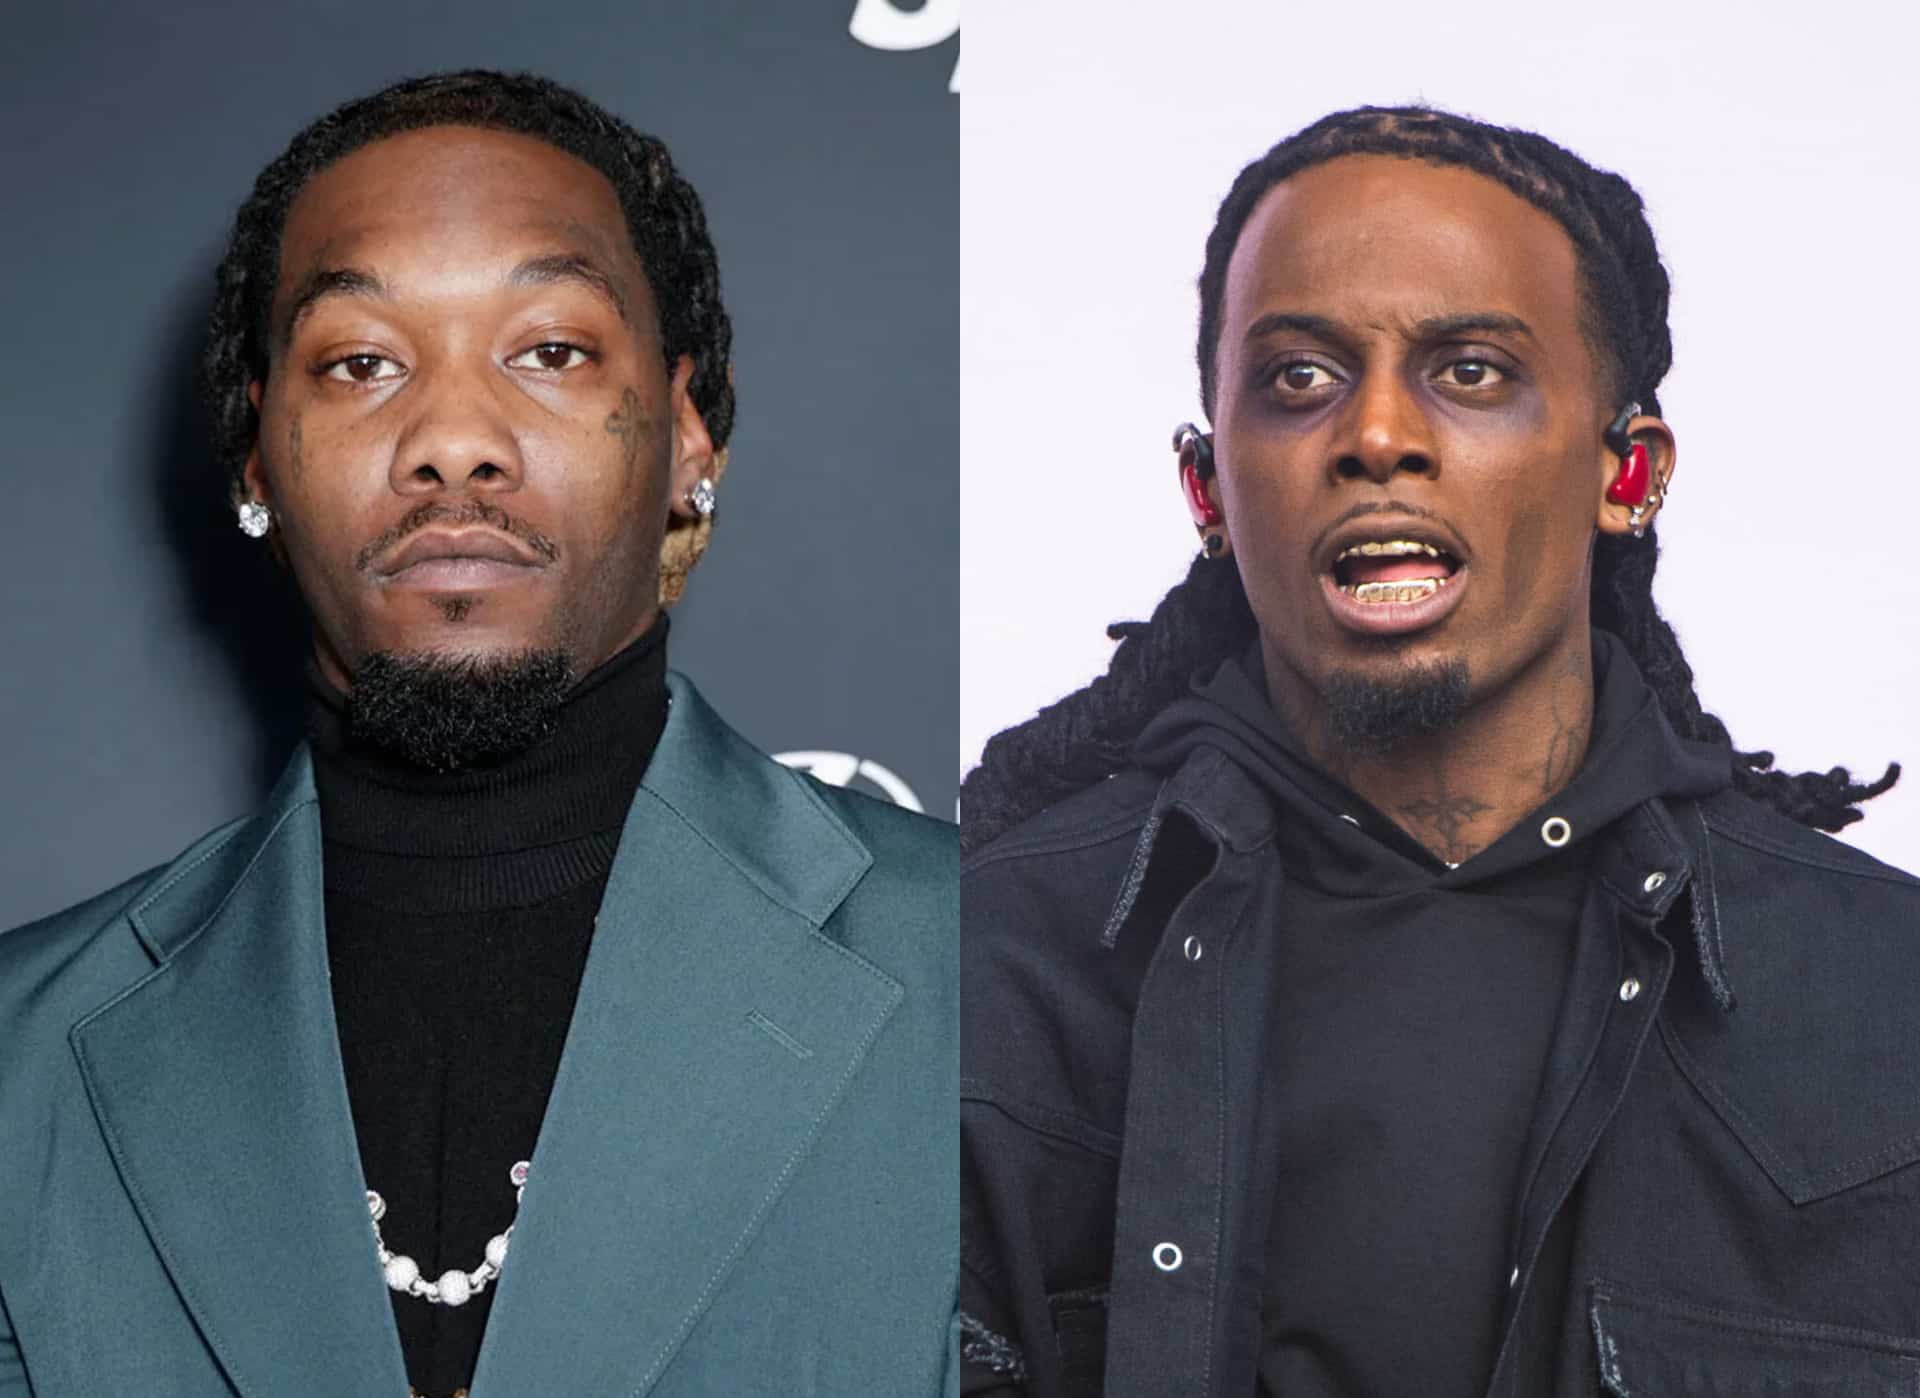 Offset Speaks On Playboi Carti Not Clearing Feature For His New Album